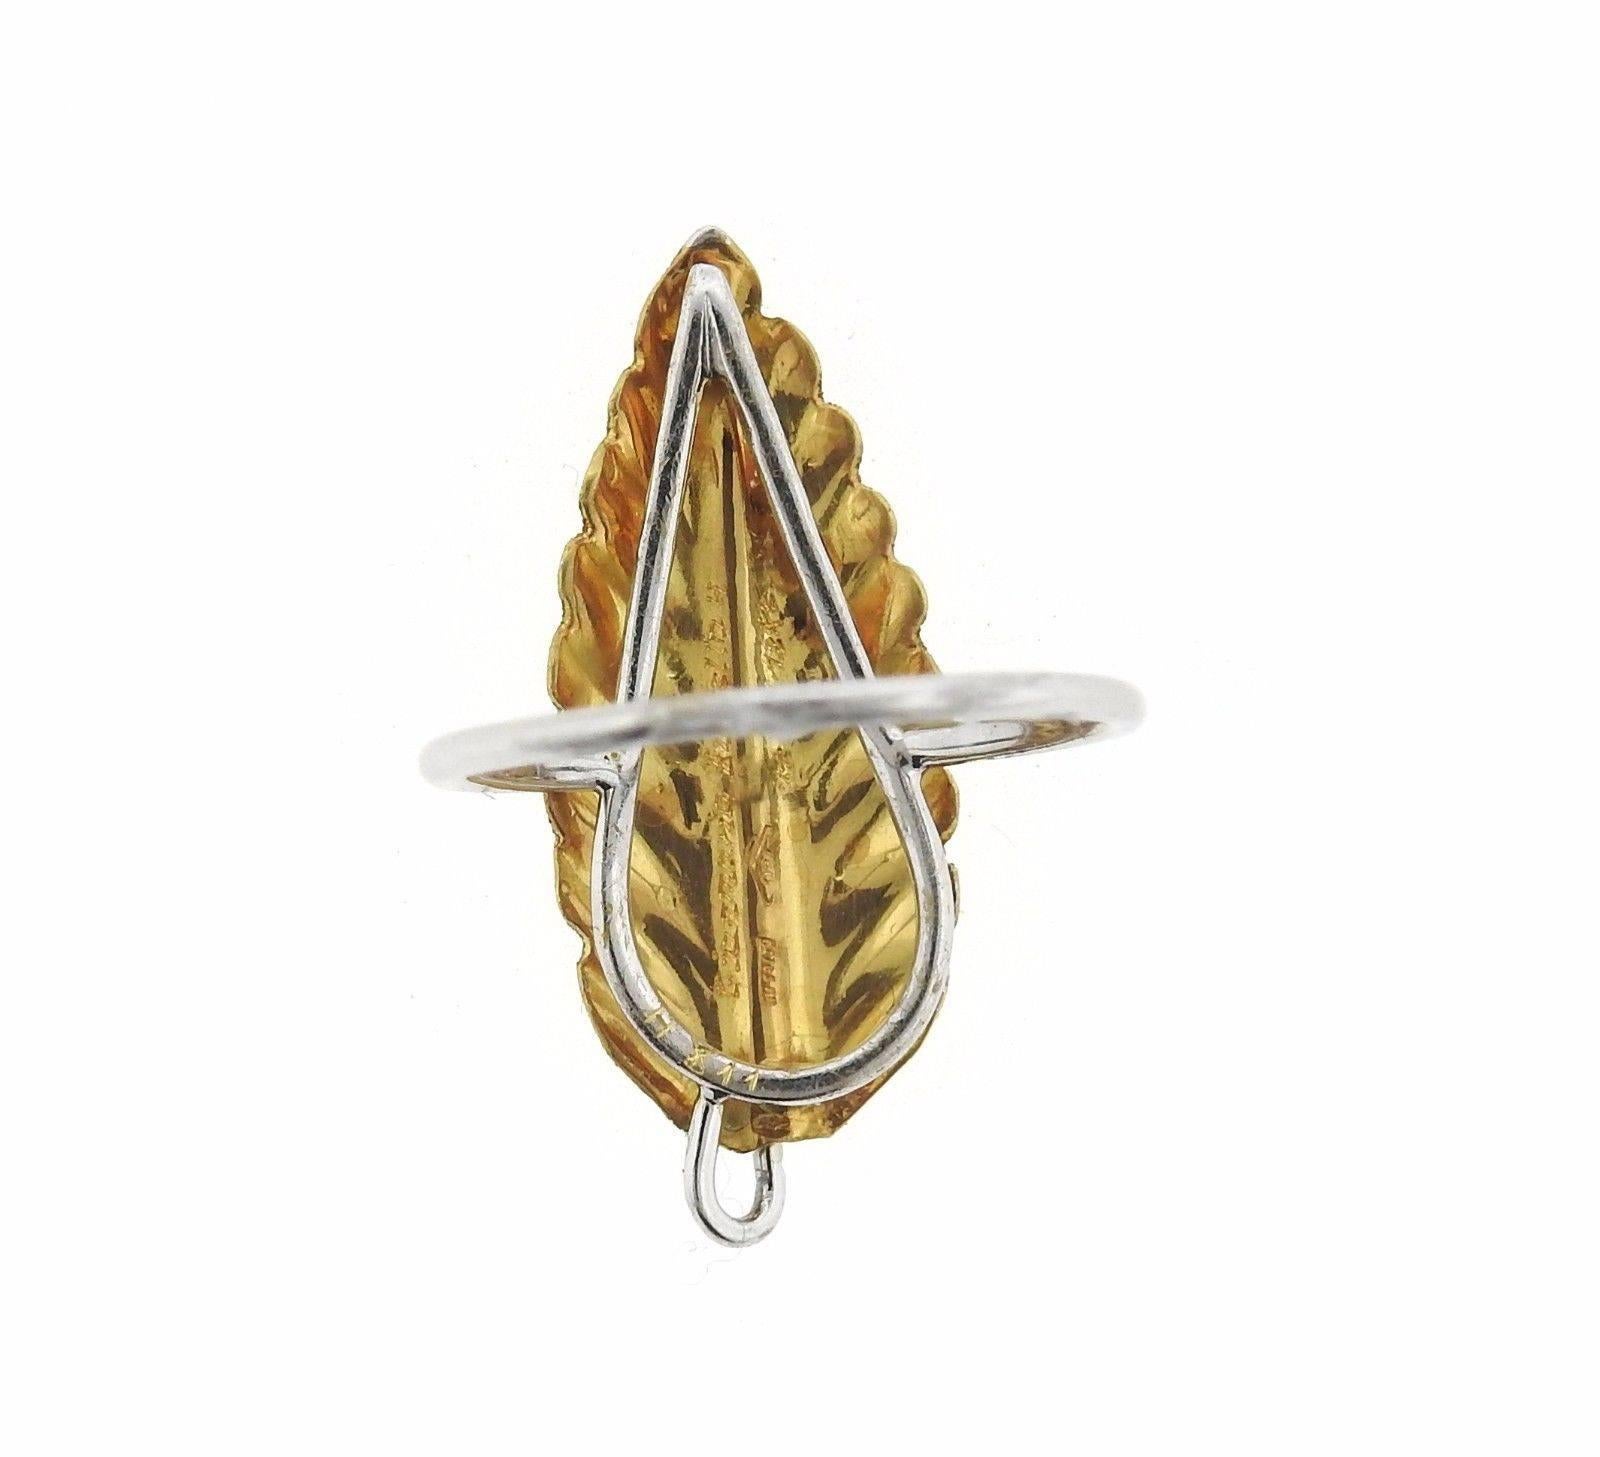 An 18k gold ring depicting a long leaf.  The ring is a size 5, and the top measures 26mm x 10.5mm.  The weight of the ring is 2.5 grams.  Marked:	Gianmaria Buccellati, 750, Italy, 18kt.  Current retail is $2810.